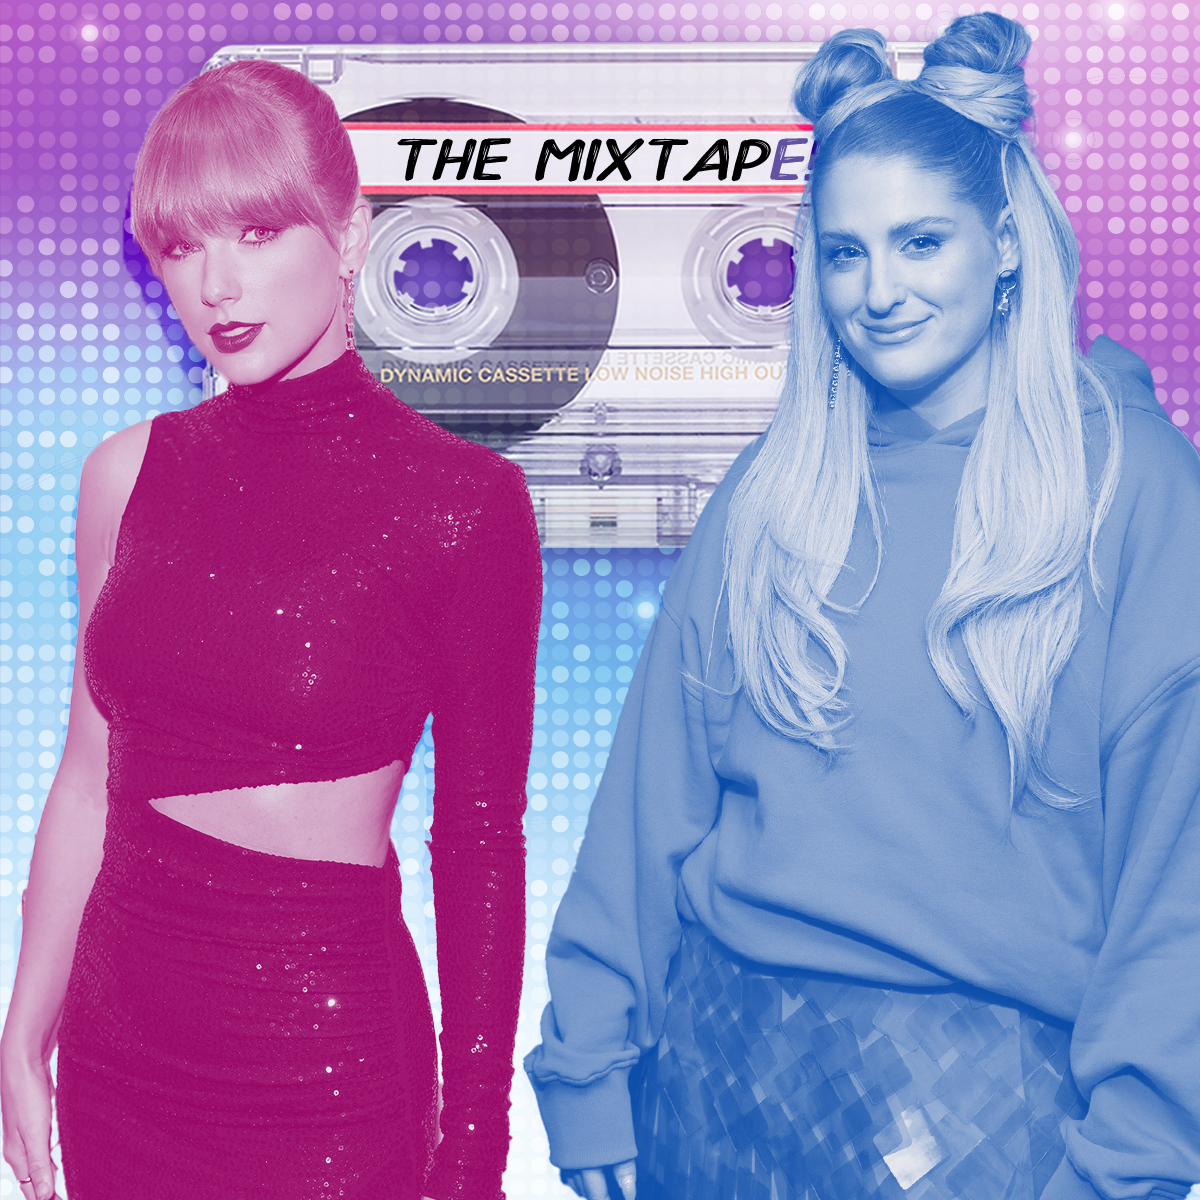 The Mixtape Presents Taylor Swift Meghan Trainor And More New Music